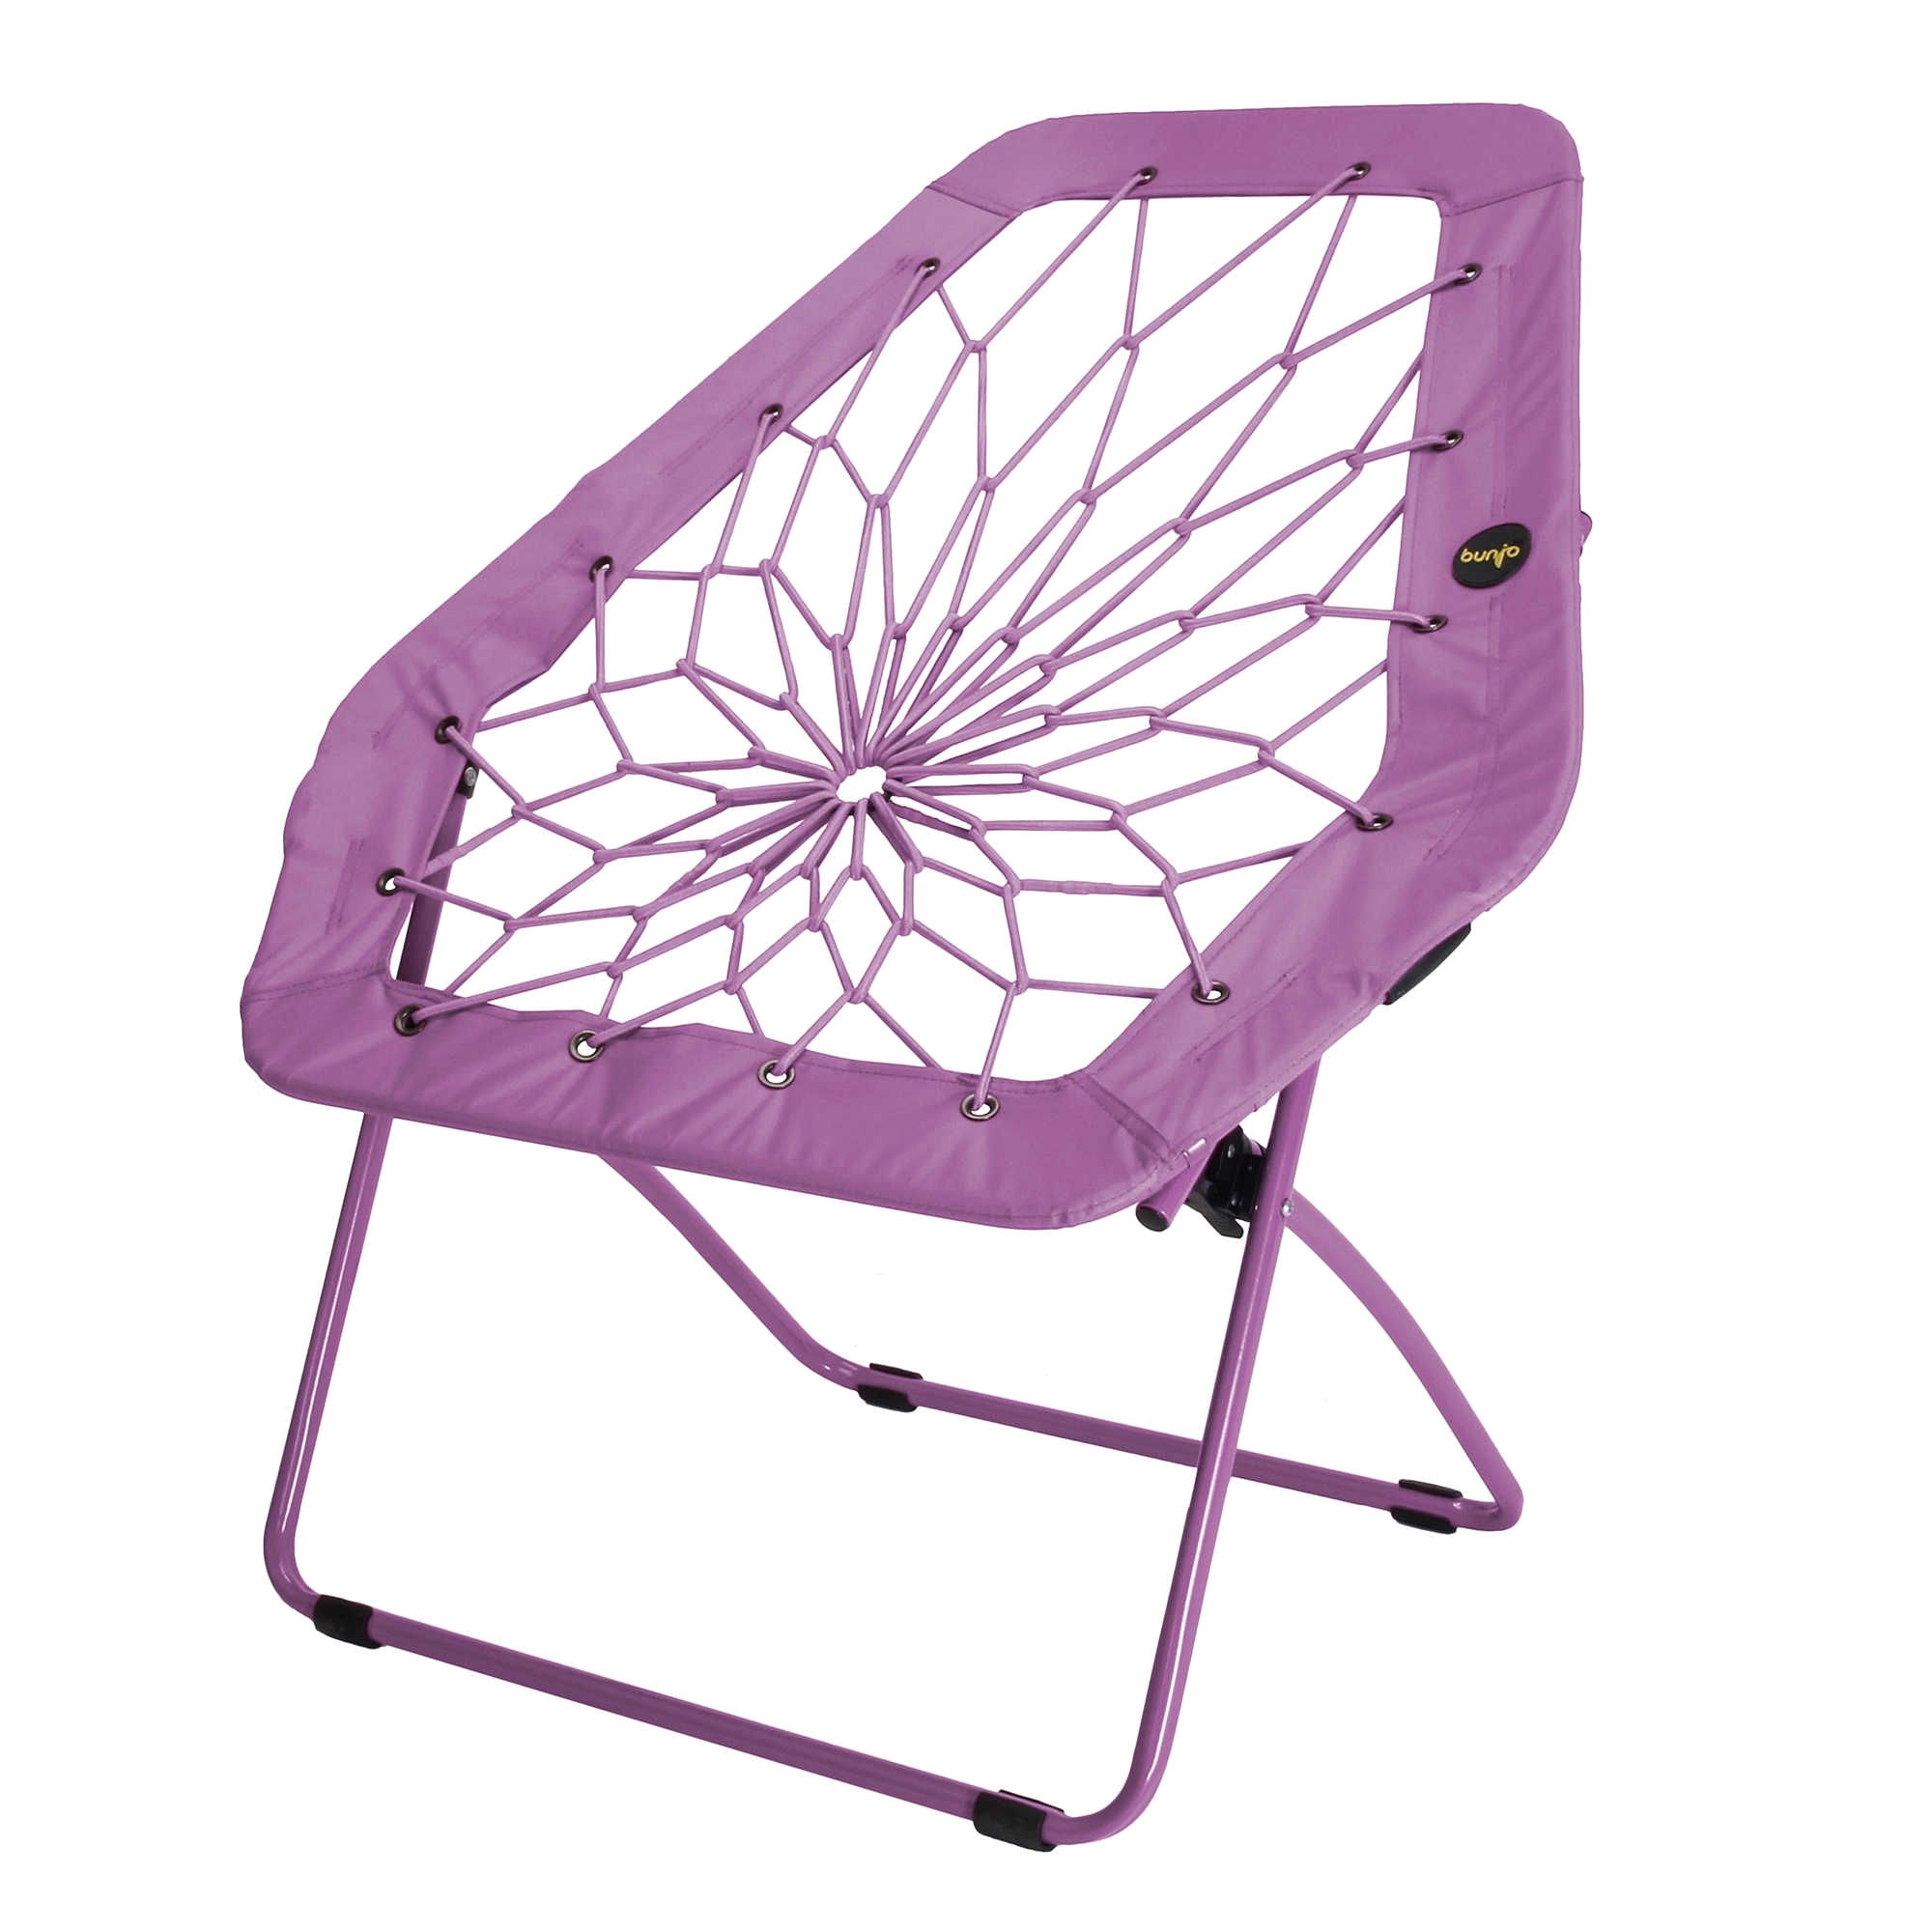 Bed Bath and Beyond Bungee Chair Bunjoa Oversized Bungee Chair College List 2 Pinterest